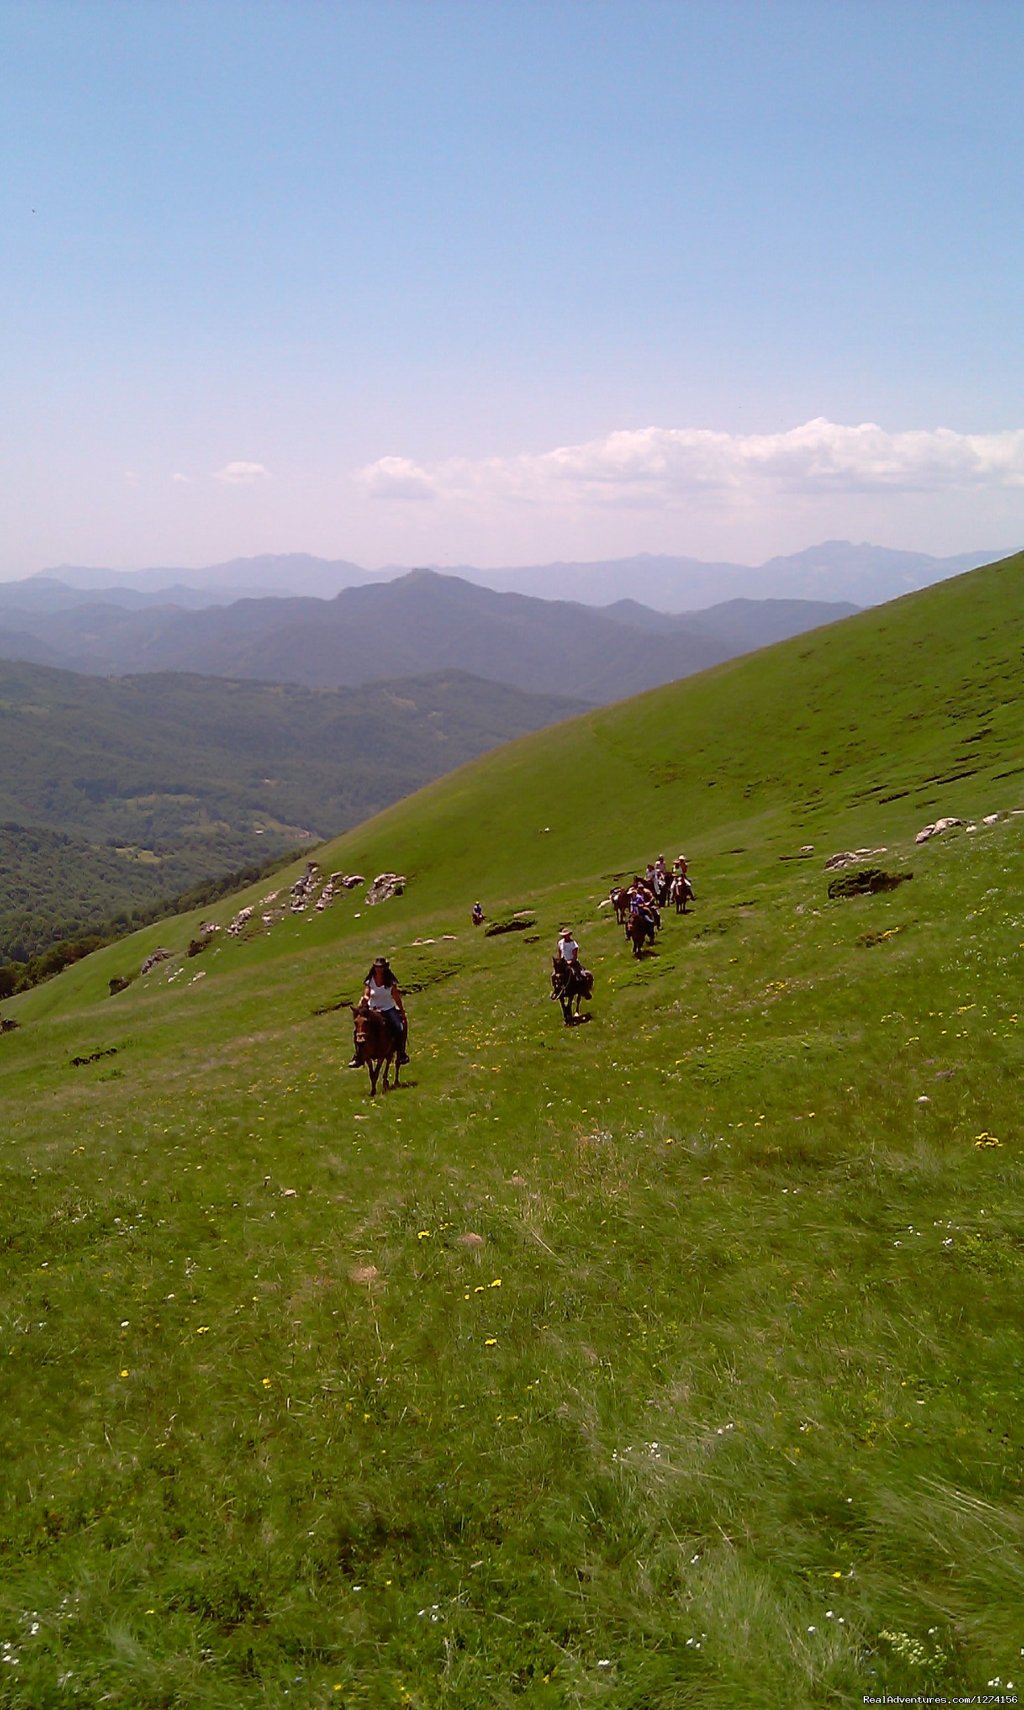 Amazing views of Sinjavinja mountain ranges | Horse riding at only ecological country,Montenegro | Image #5/14 | 